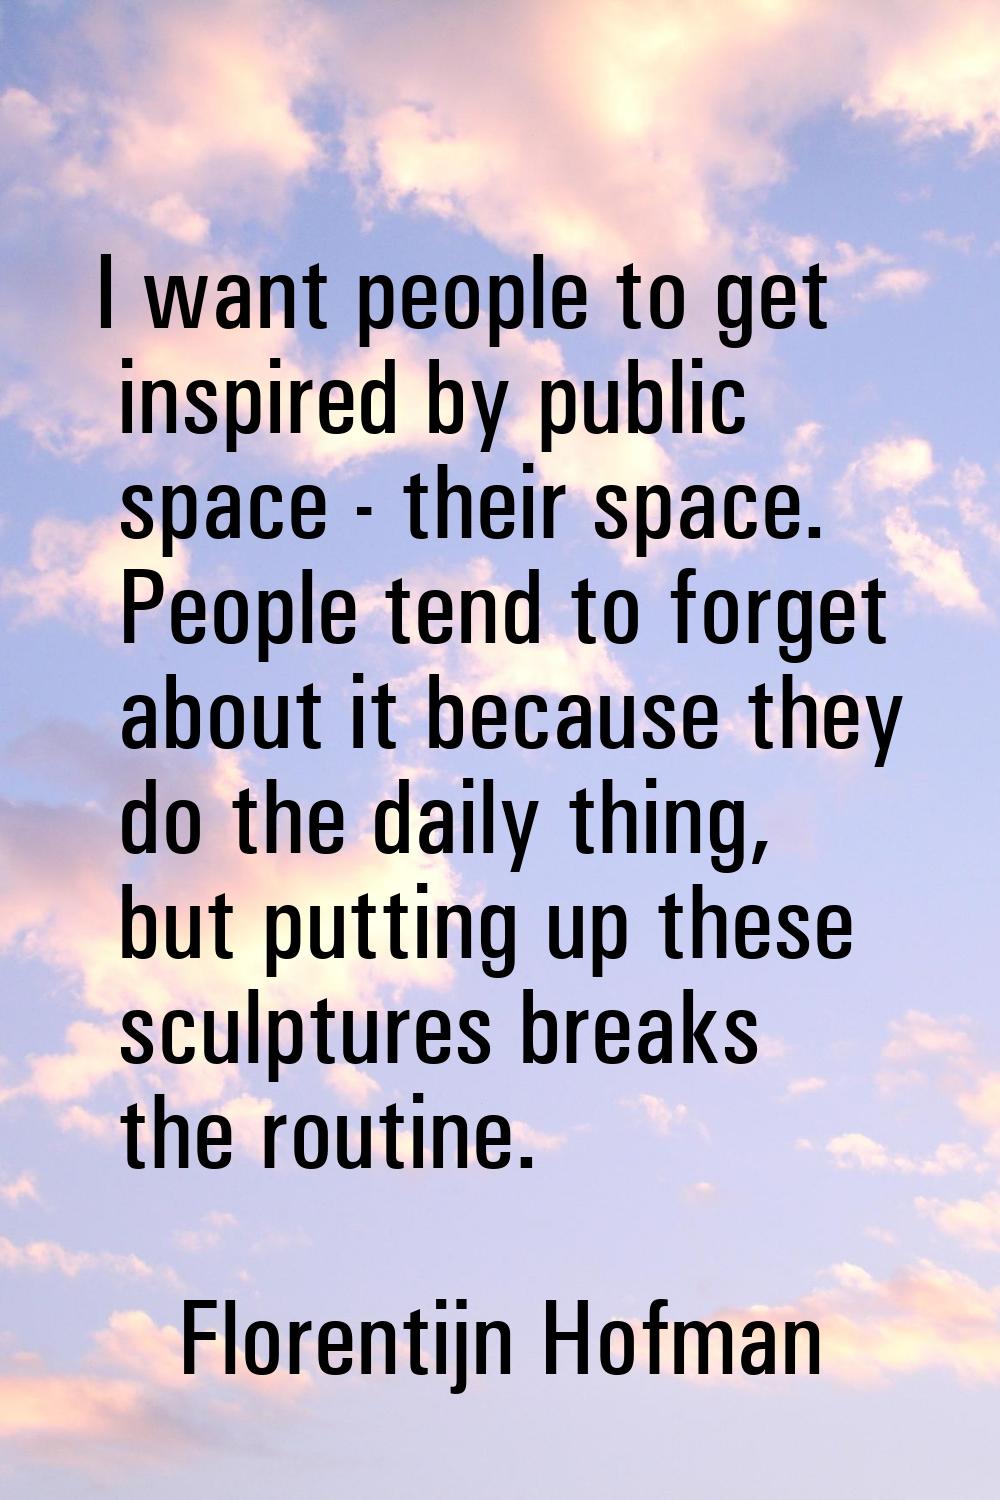 I want people to get inspired by public space - their space. People tend to forget about it because